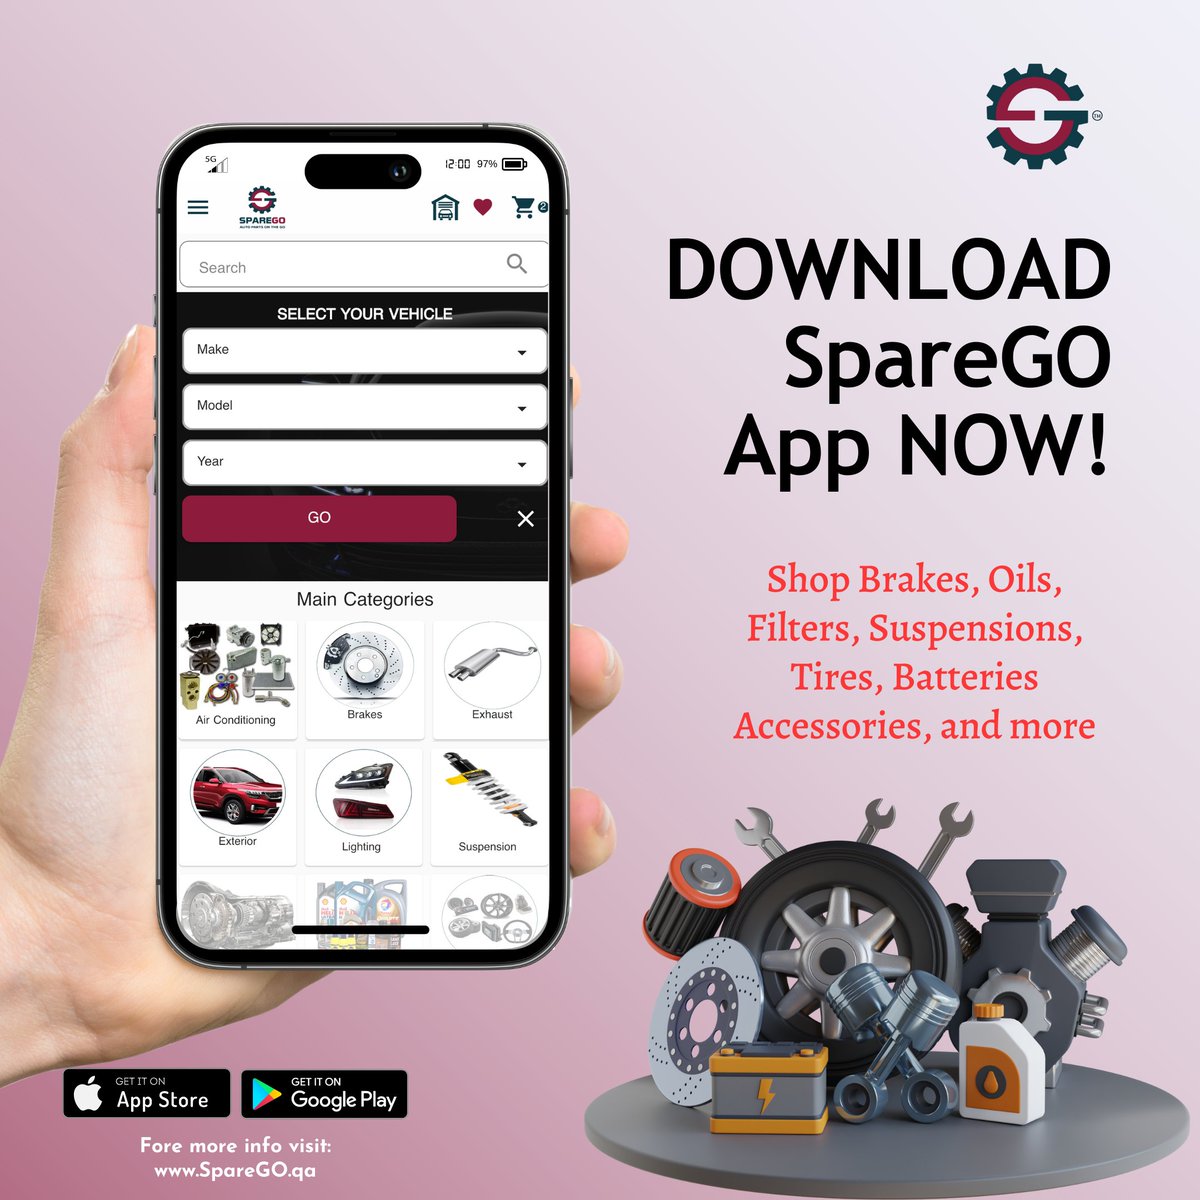 Download our app and ORDER NOW. ⚙🚗

For iOS: rb.gy/ox4bc
For Android: rb.gy/m4ztx

Auto parts ON-THE-GO, ON BUDGET, ON TIME

#SpareGO #Qatar #Doha #automotive #automobile #autoparts #customcar #Cars #vehicle #musclecars #alwakrah #Turbo #supercars…